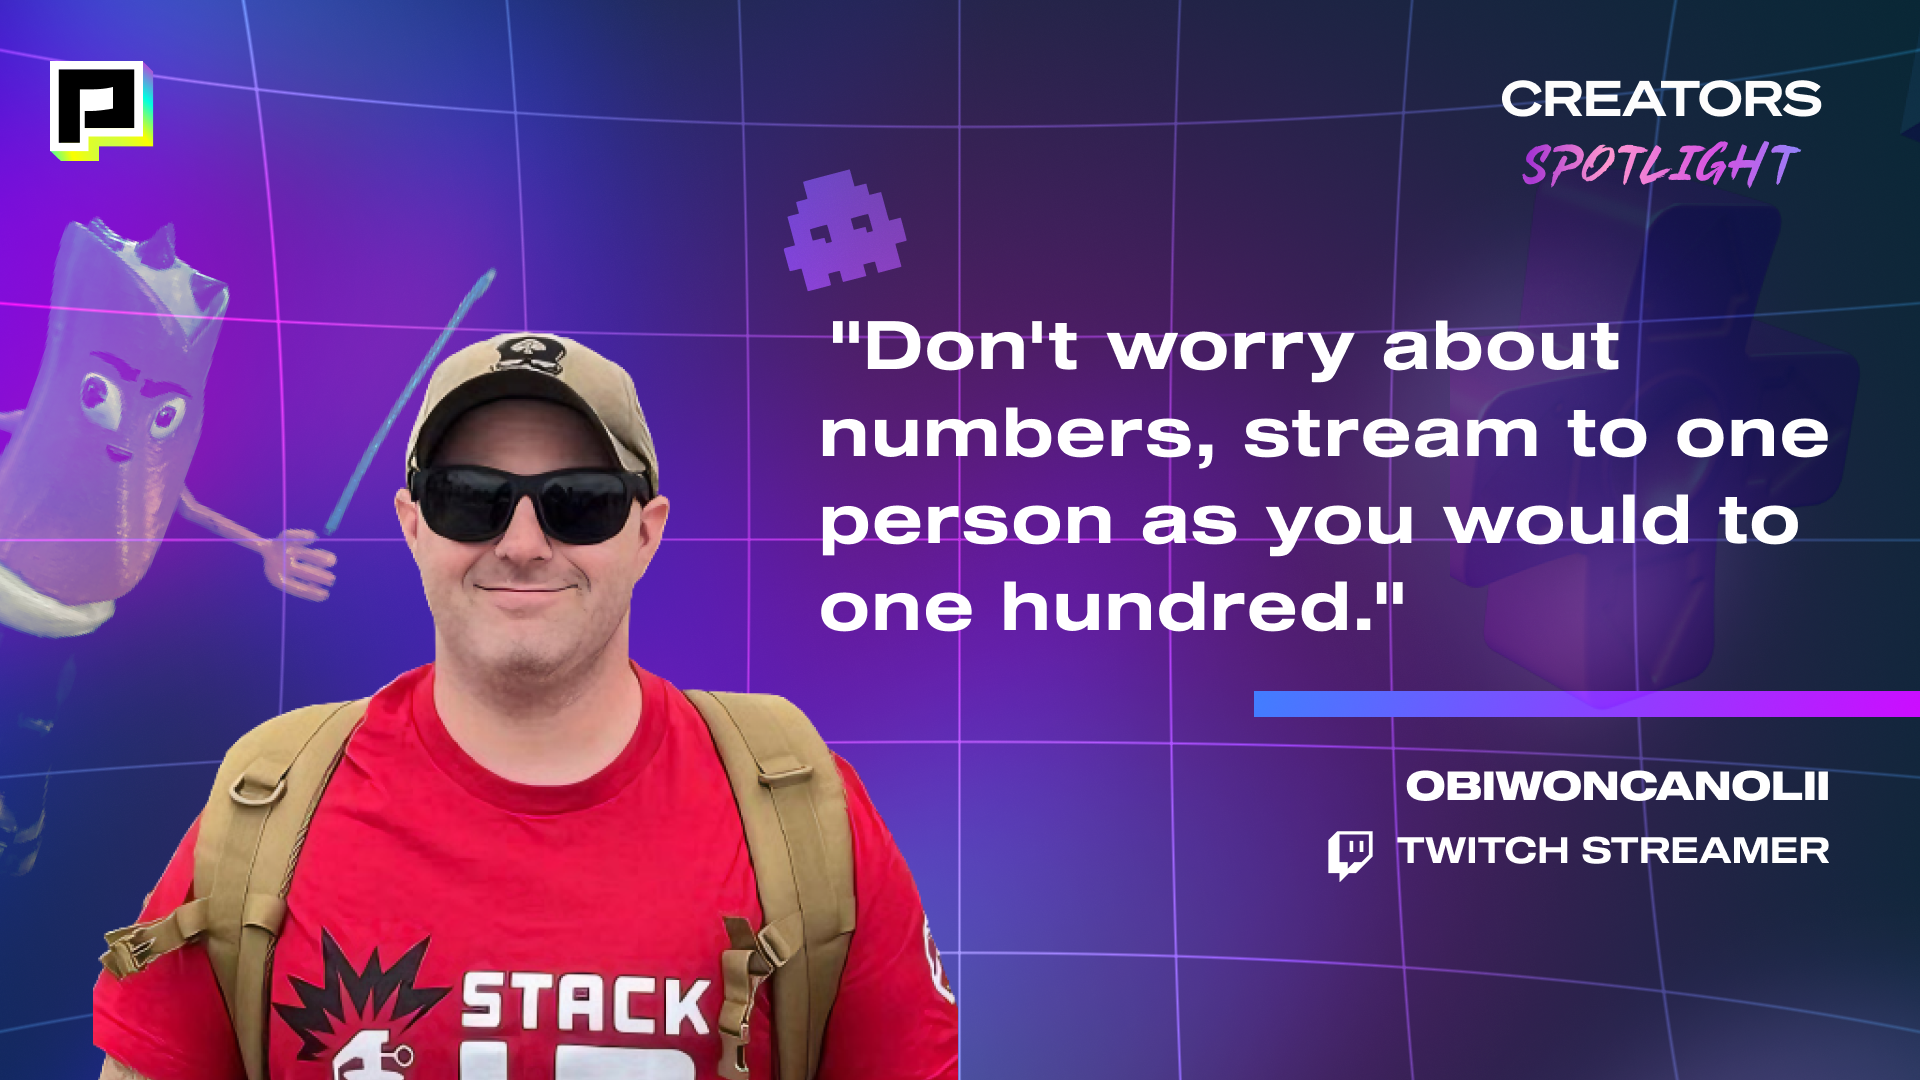 Image of Twitch Streamer, OBIWONCANOLII with his quote, "Don't worry about numbers, stream to one person as you would to one hundred."